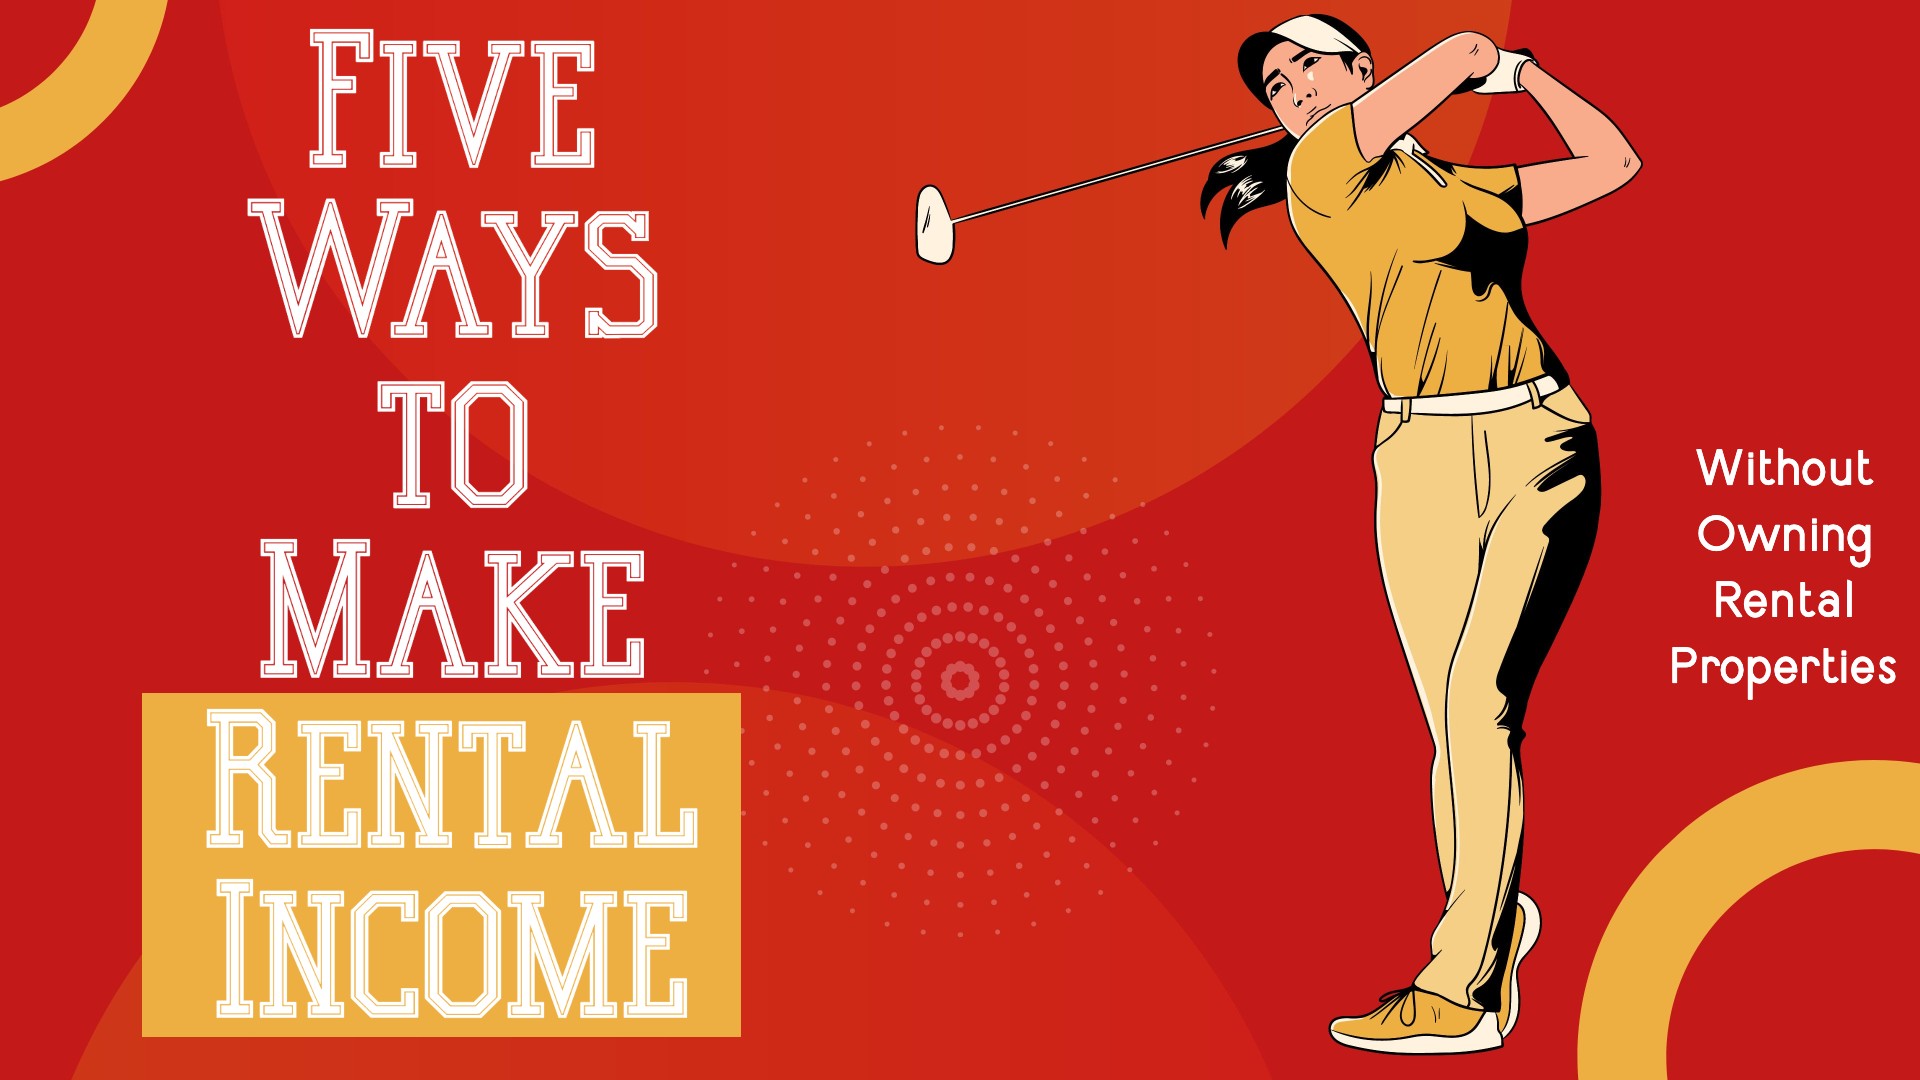 Five Ways to Make Rental Income Without Owning Rental Properties